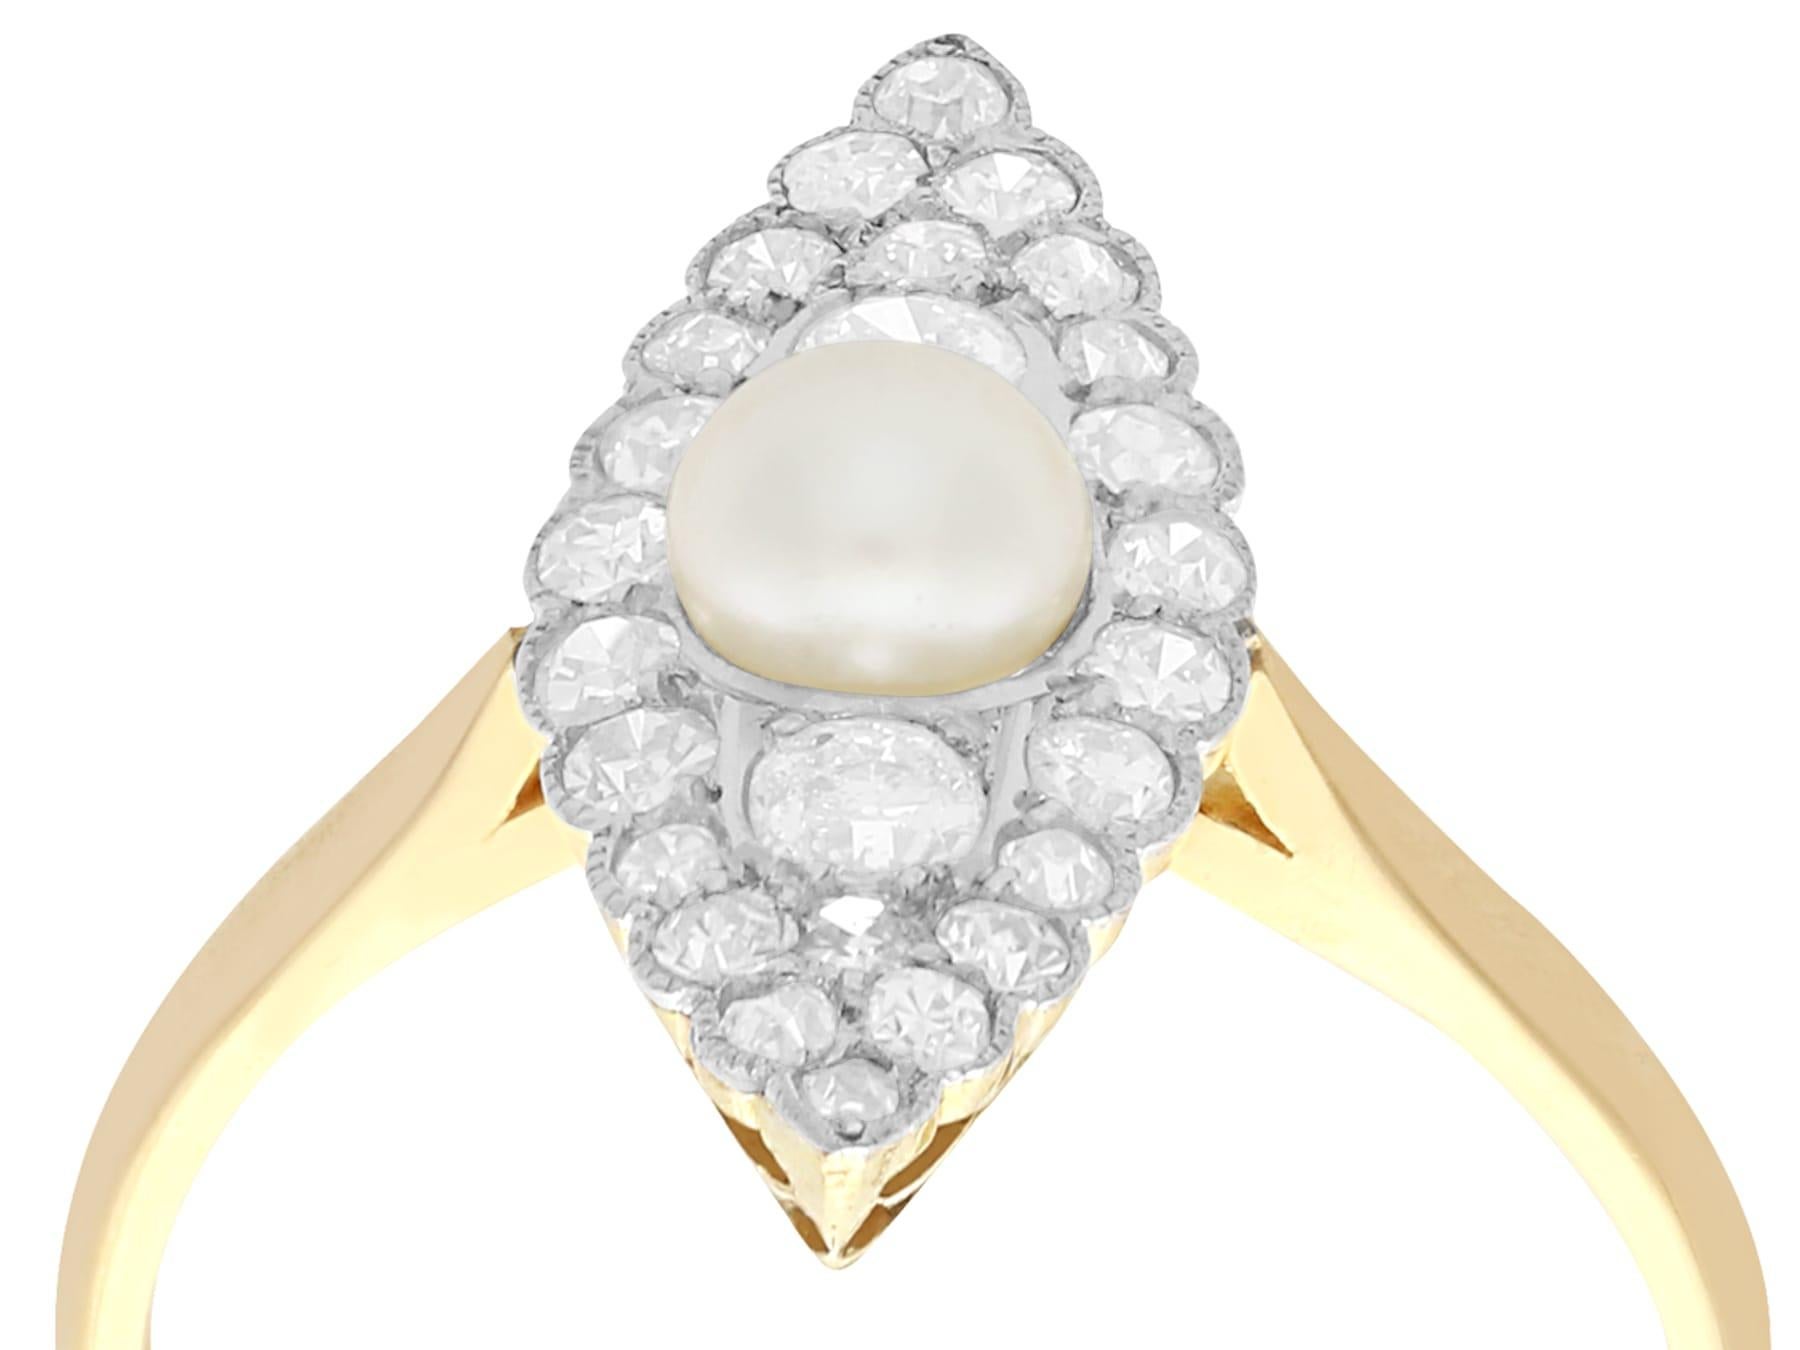 A fine and impressive antique pearl and 0.42 carat diamond, 18 karat yellow gold and platinum set marquise shaped dress ring; part of our diverse antique jewelry and estate jewelry collections.

This fine and impressive pearl and diamond ring has